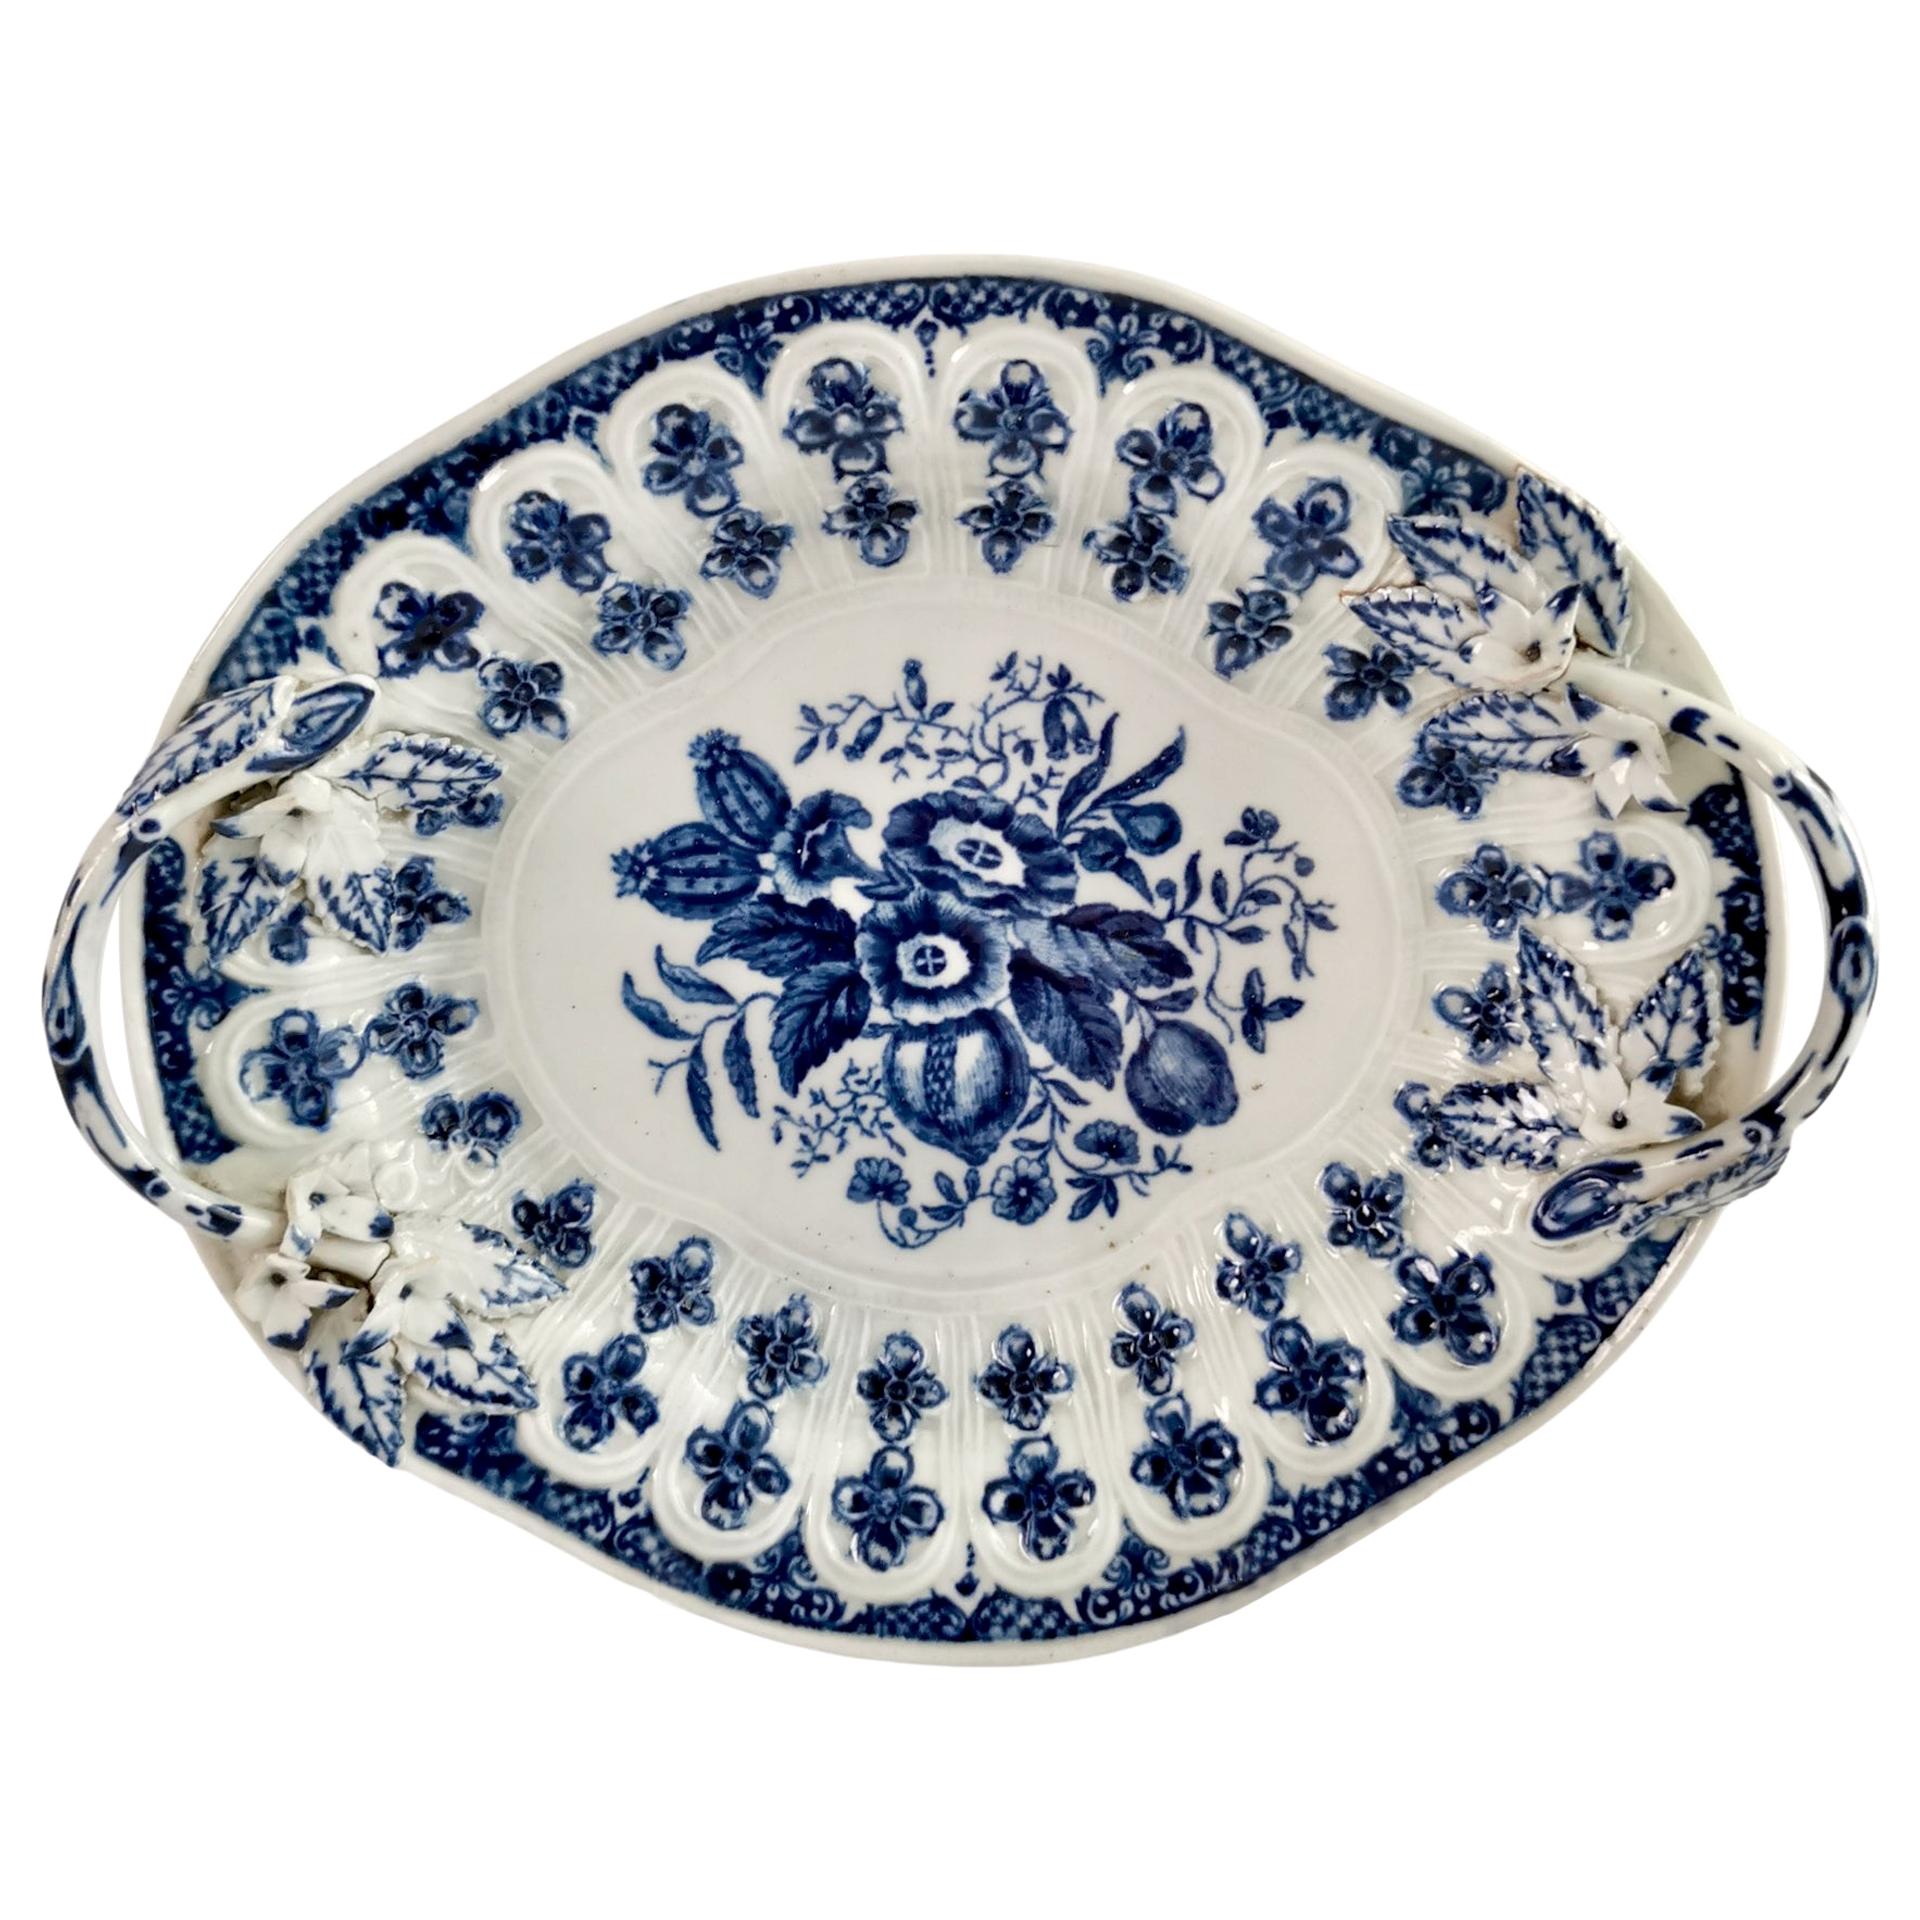 Worcester Porcelain Dish, Blue on White Pine Cone Pattern, circa 1770